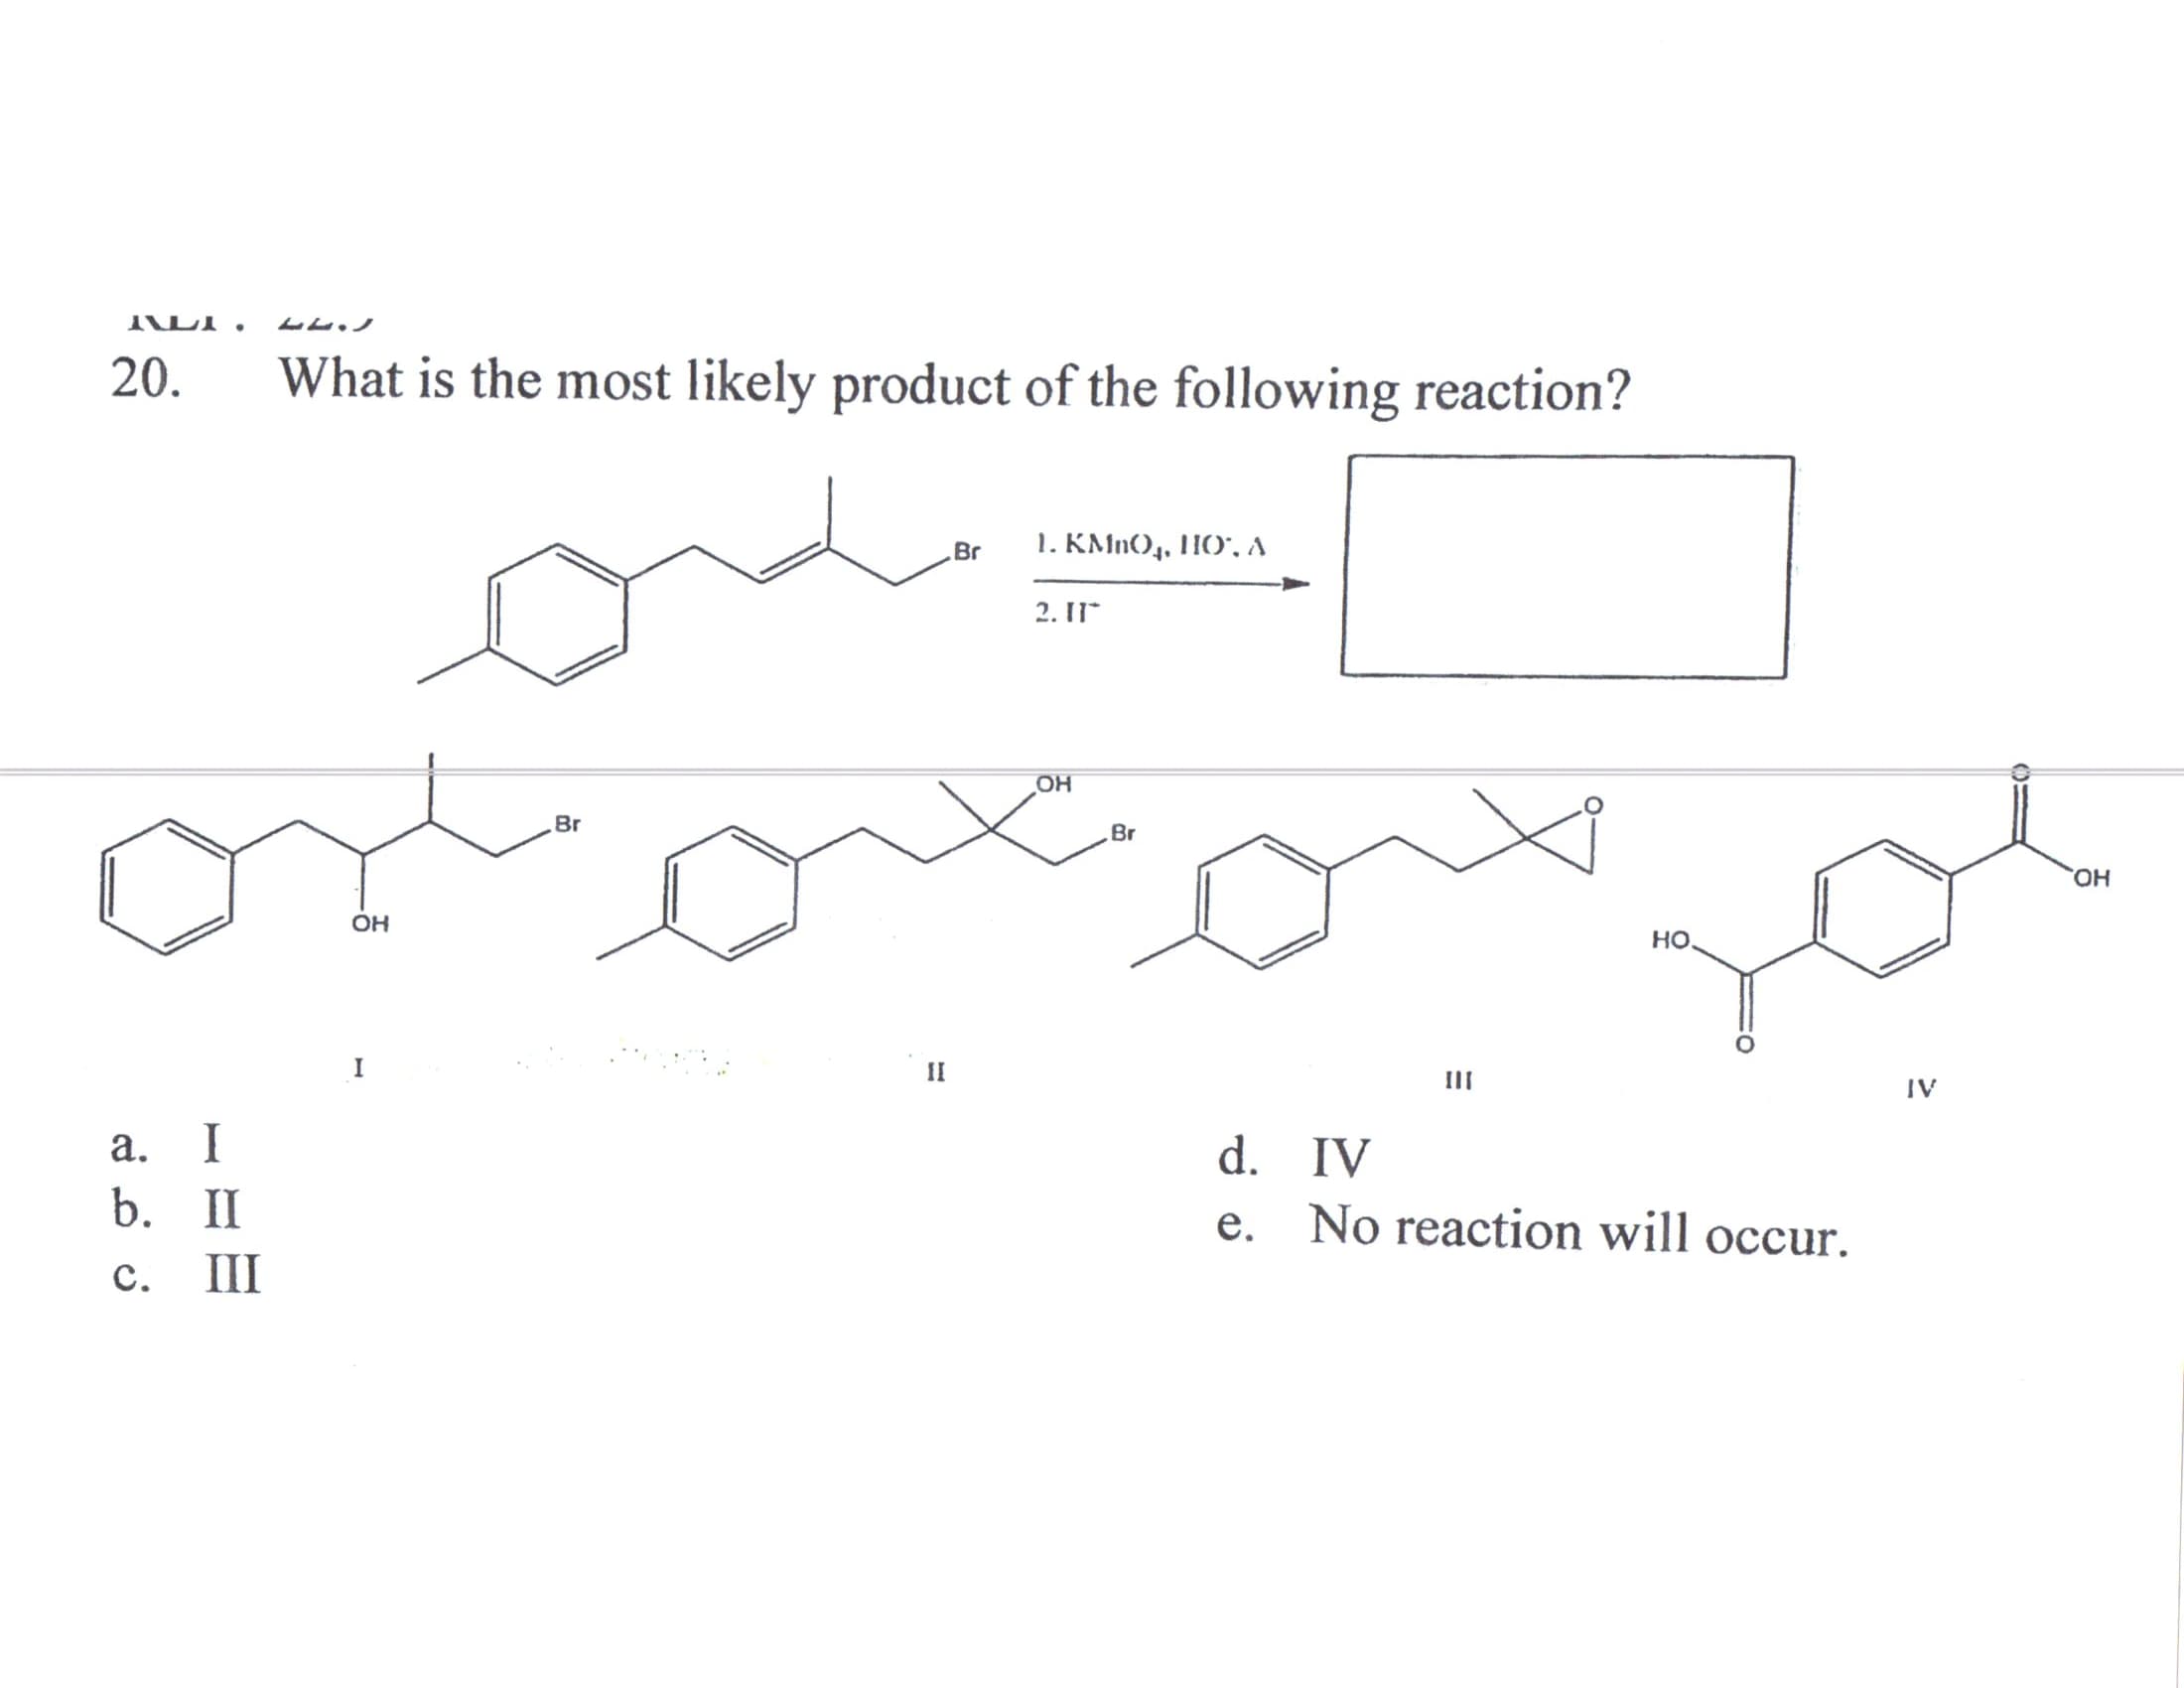 20.
What is the most likely product of the following reaction?
Br
1. KMn(), HO", A
2. II
